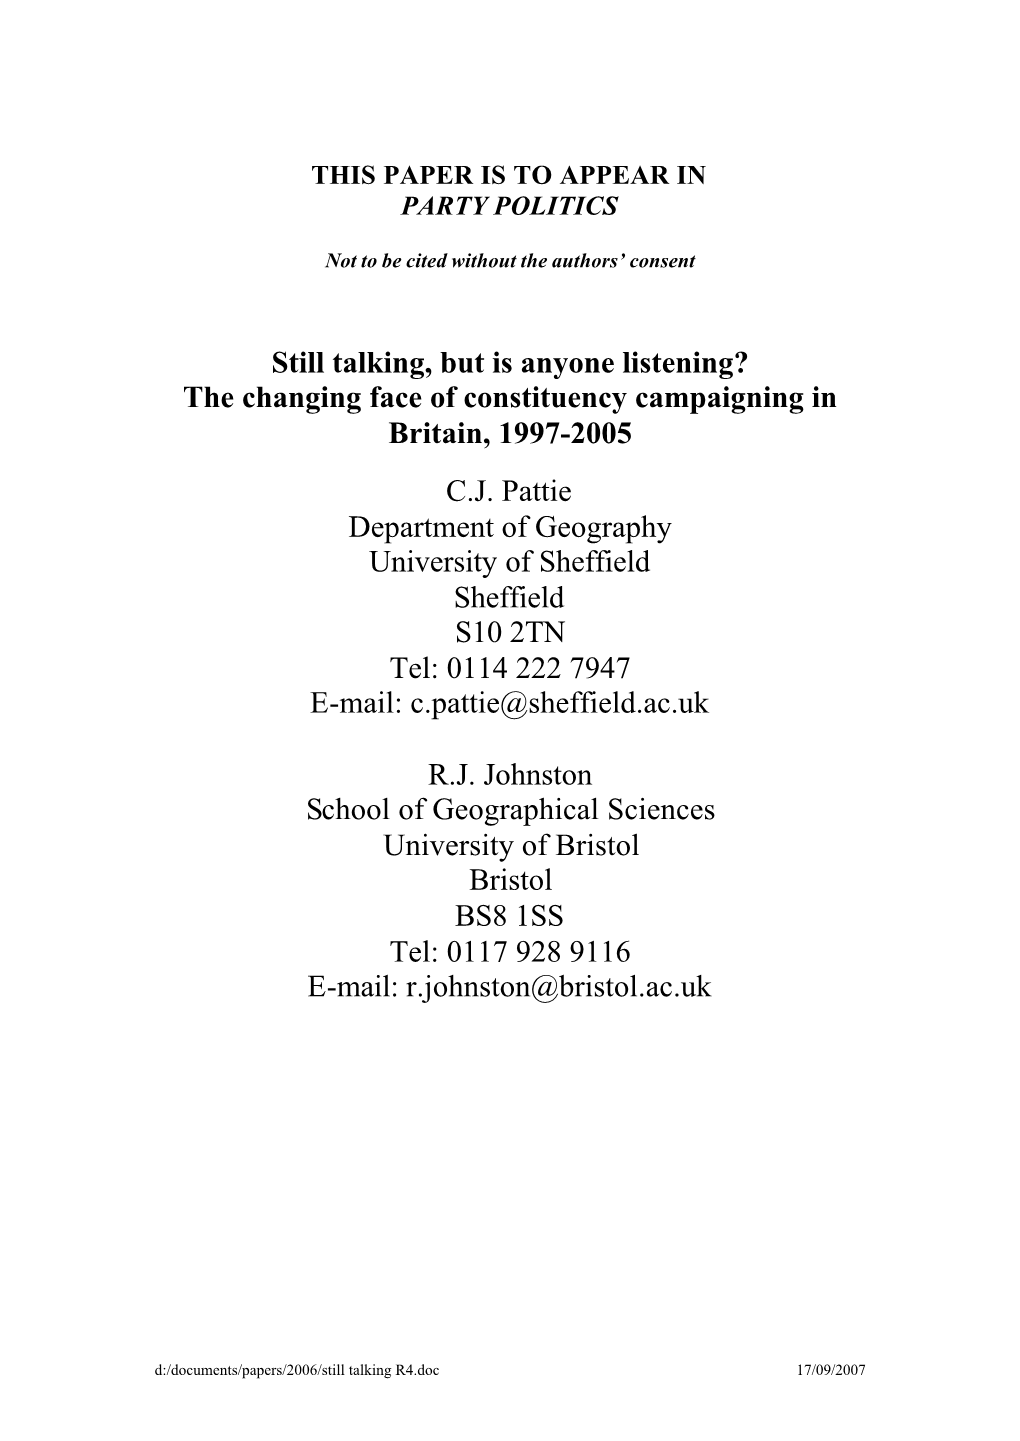 The Changing Face of Constituency Campaigning in Britain, 1997-2005